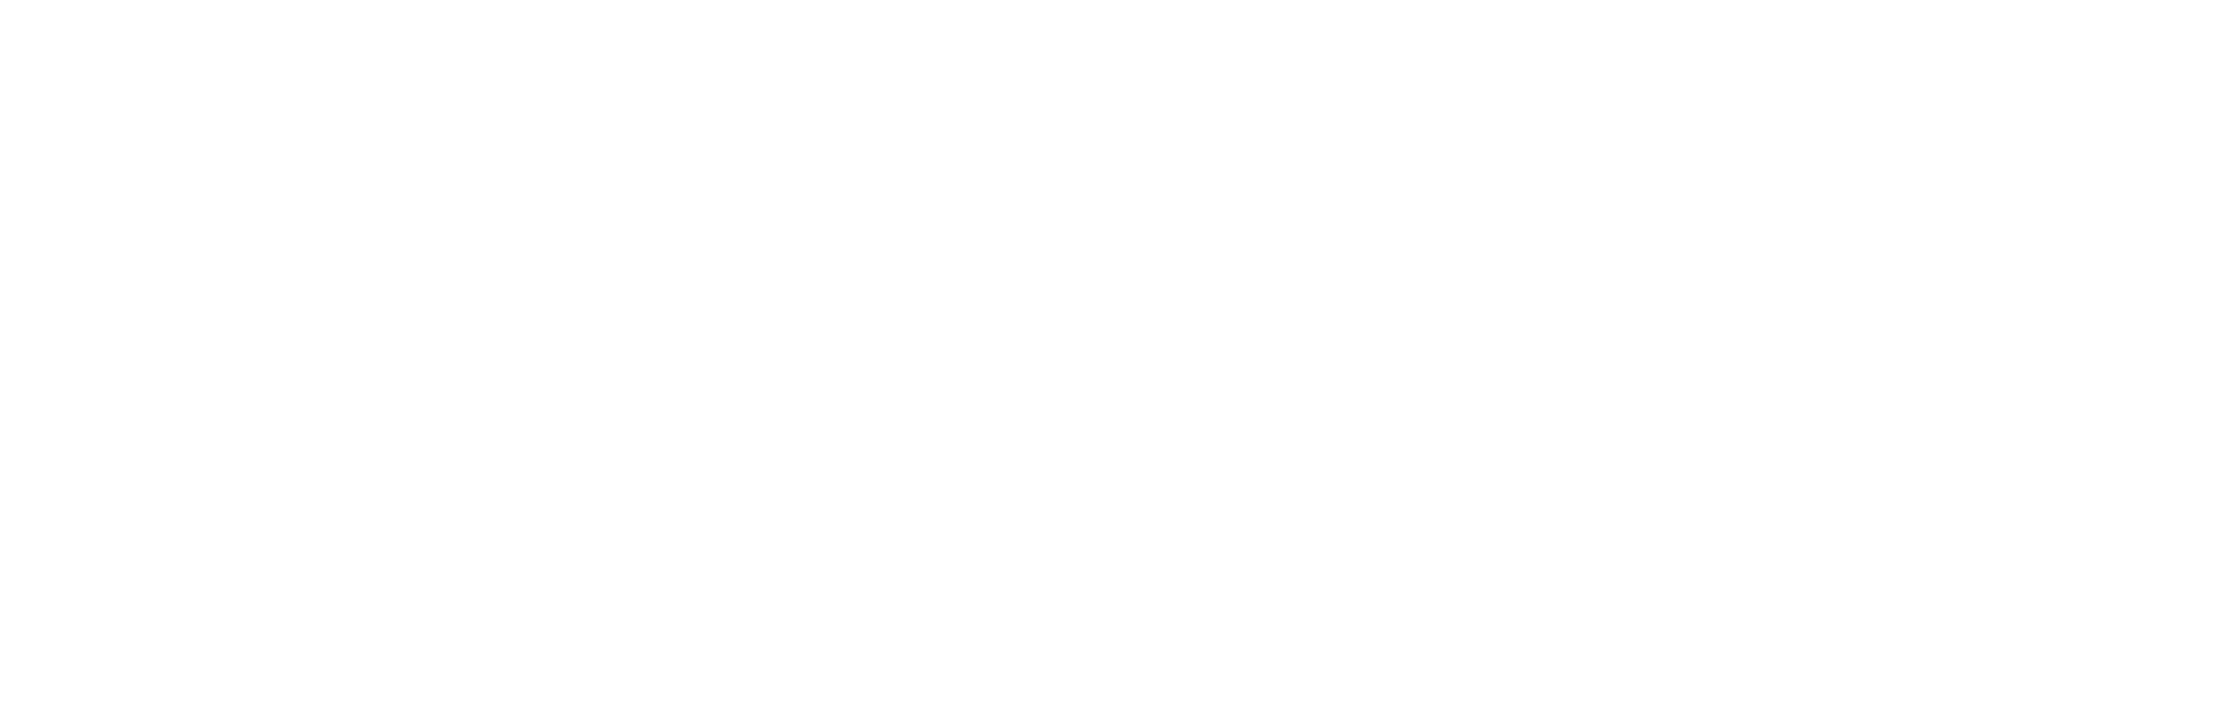 Metro Connect Usa - White Background Instagram Size (4798x2698), Png Download